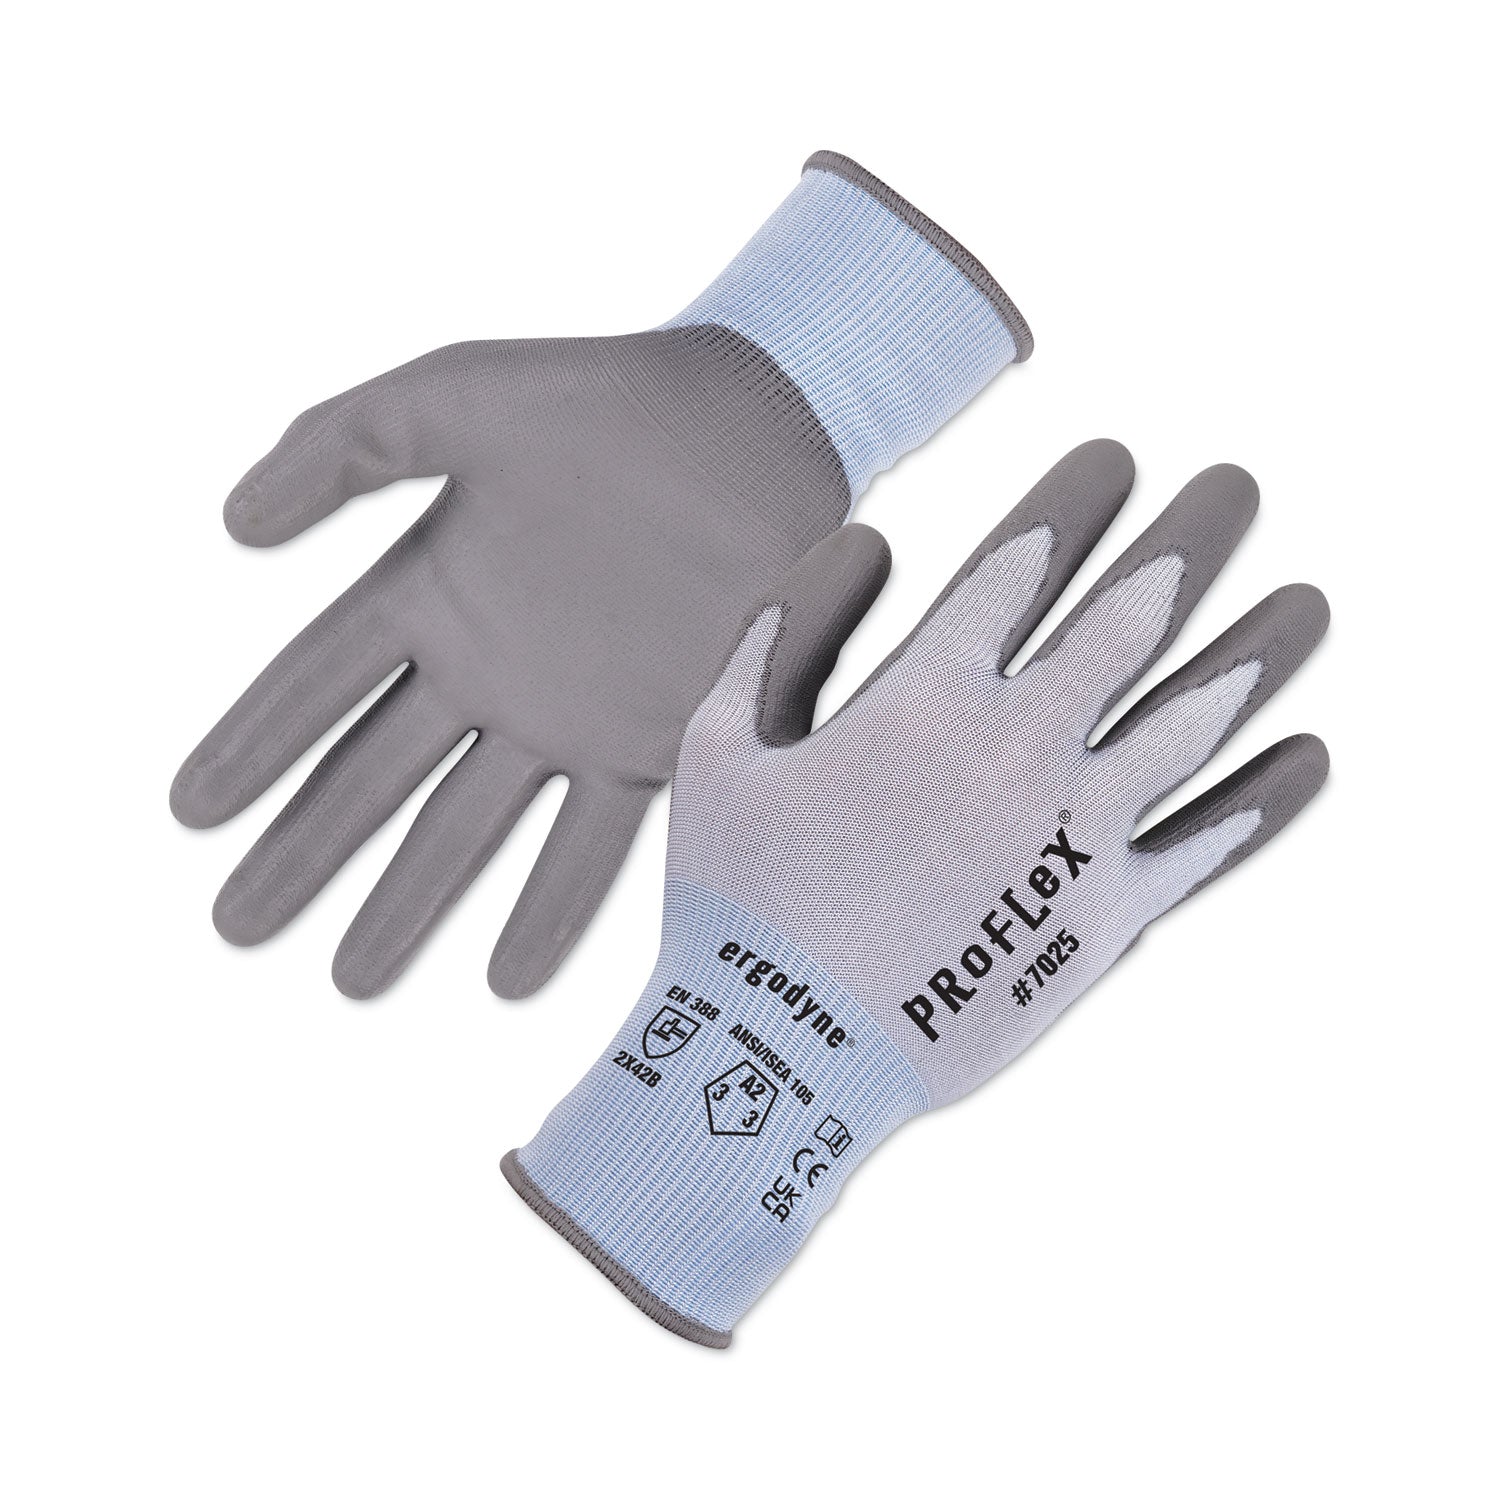 proflex-7025-ansi-a2-pu-coated-cr-gloves-blue-x-large-pair-ships-in-1-3-business-days_ego10435 - 1